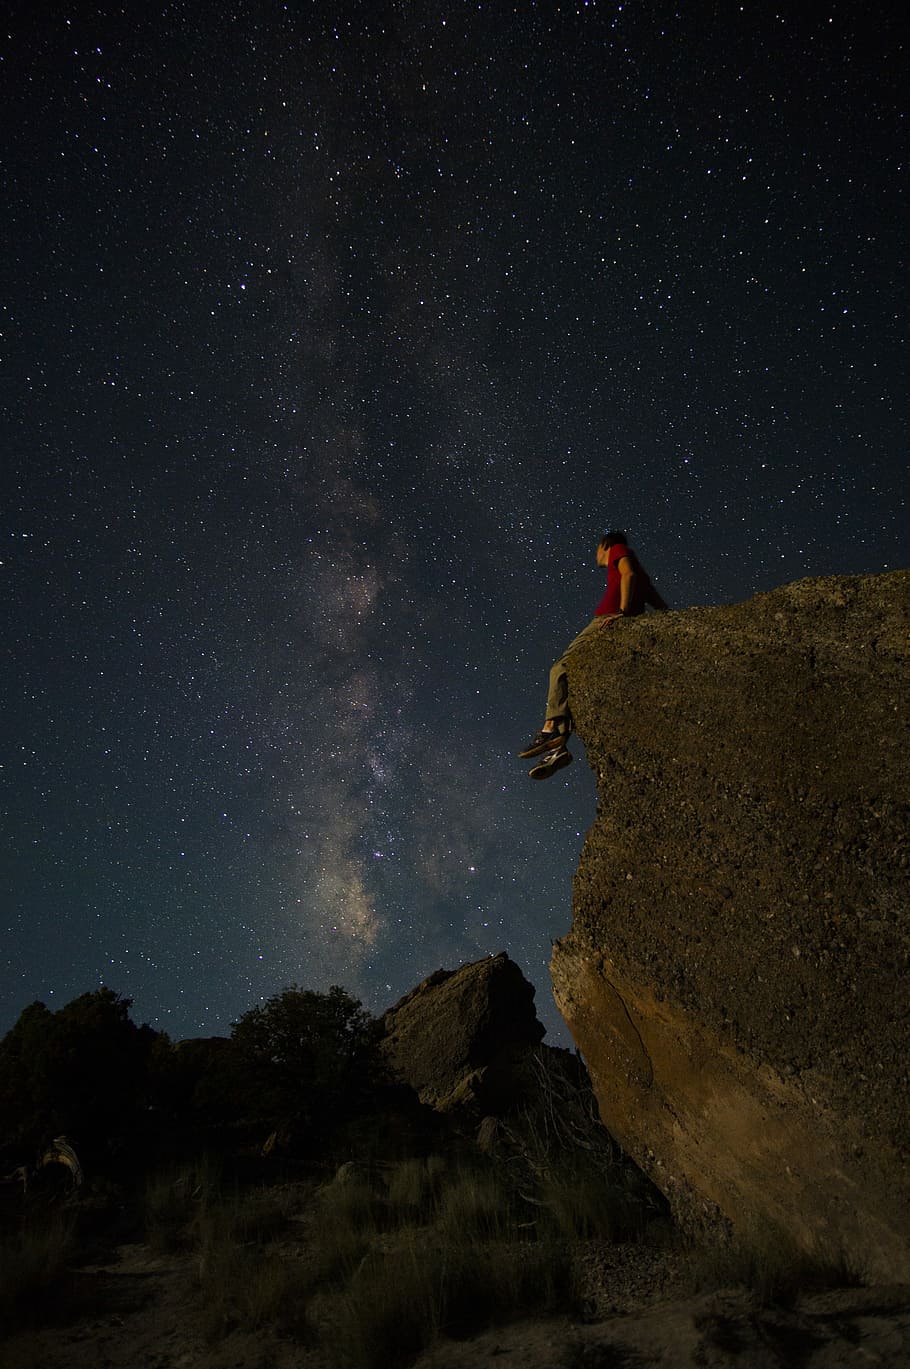 Hd Wallpaper Person Sitting On Edge Of Large Rock Under Starry Night Sky Man In Red T Shirt Sitting On Boulder Looking At The Sky Full Of Stars Wallpaper Flare